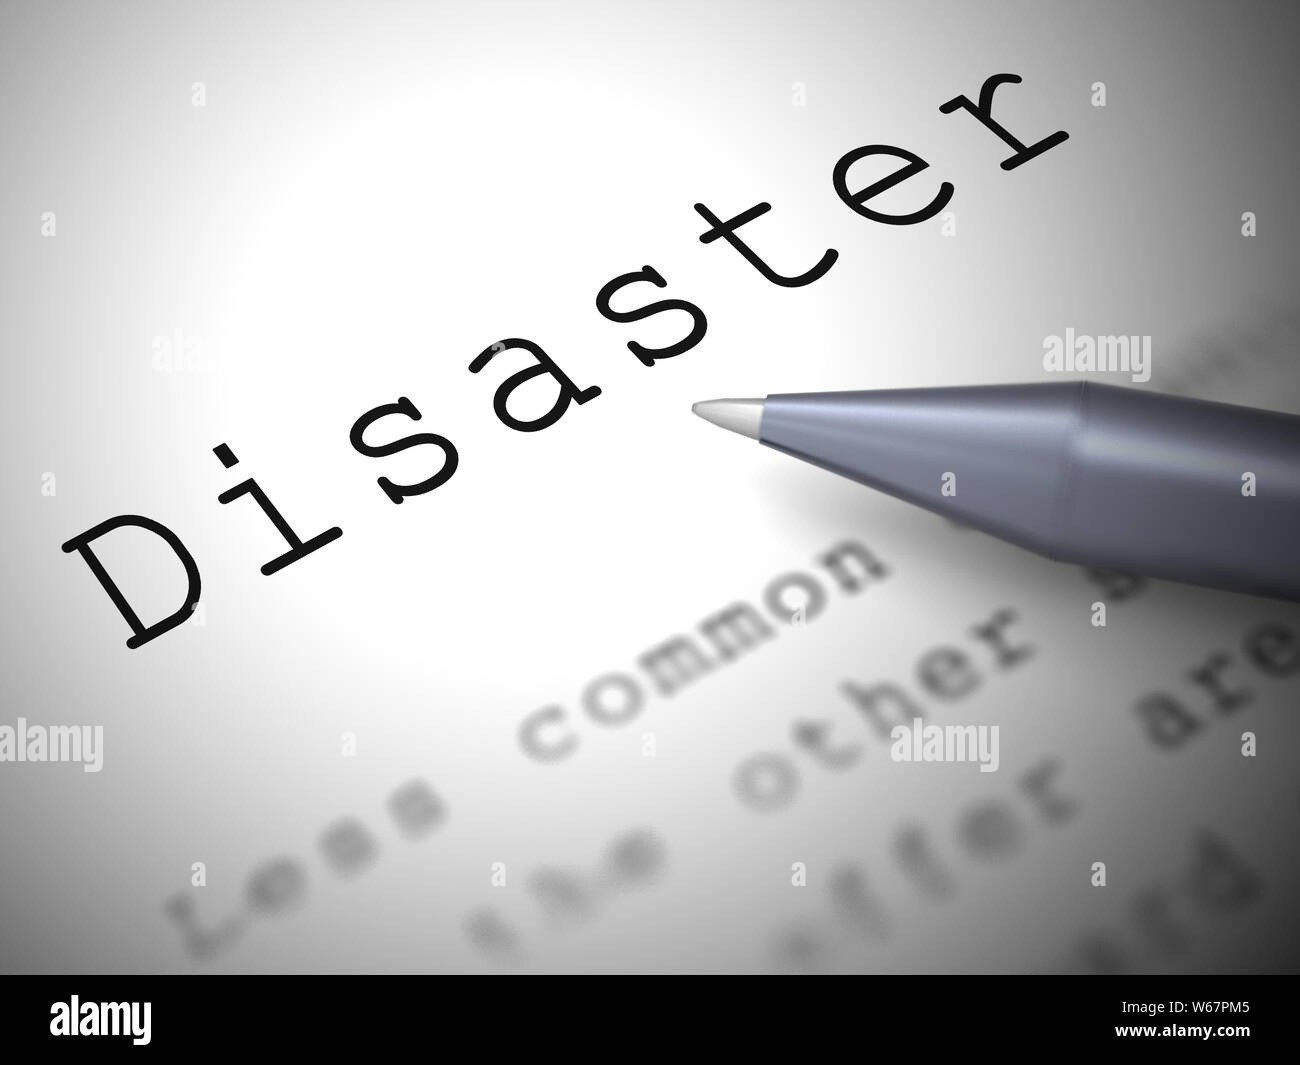 Disaster concept icon means disappointment mishaps.  Bad luck causing setbacks and ruin - 3d illustration Stock Photo